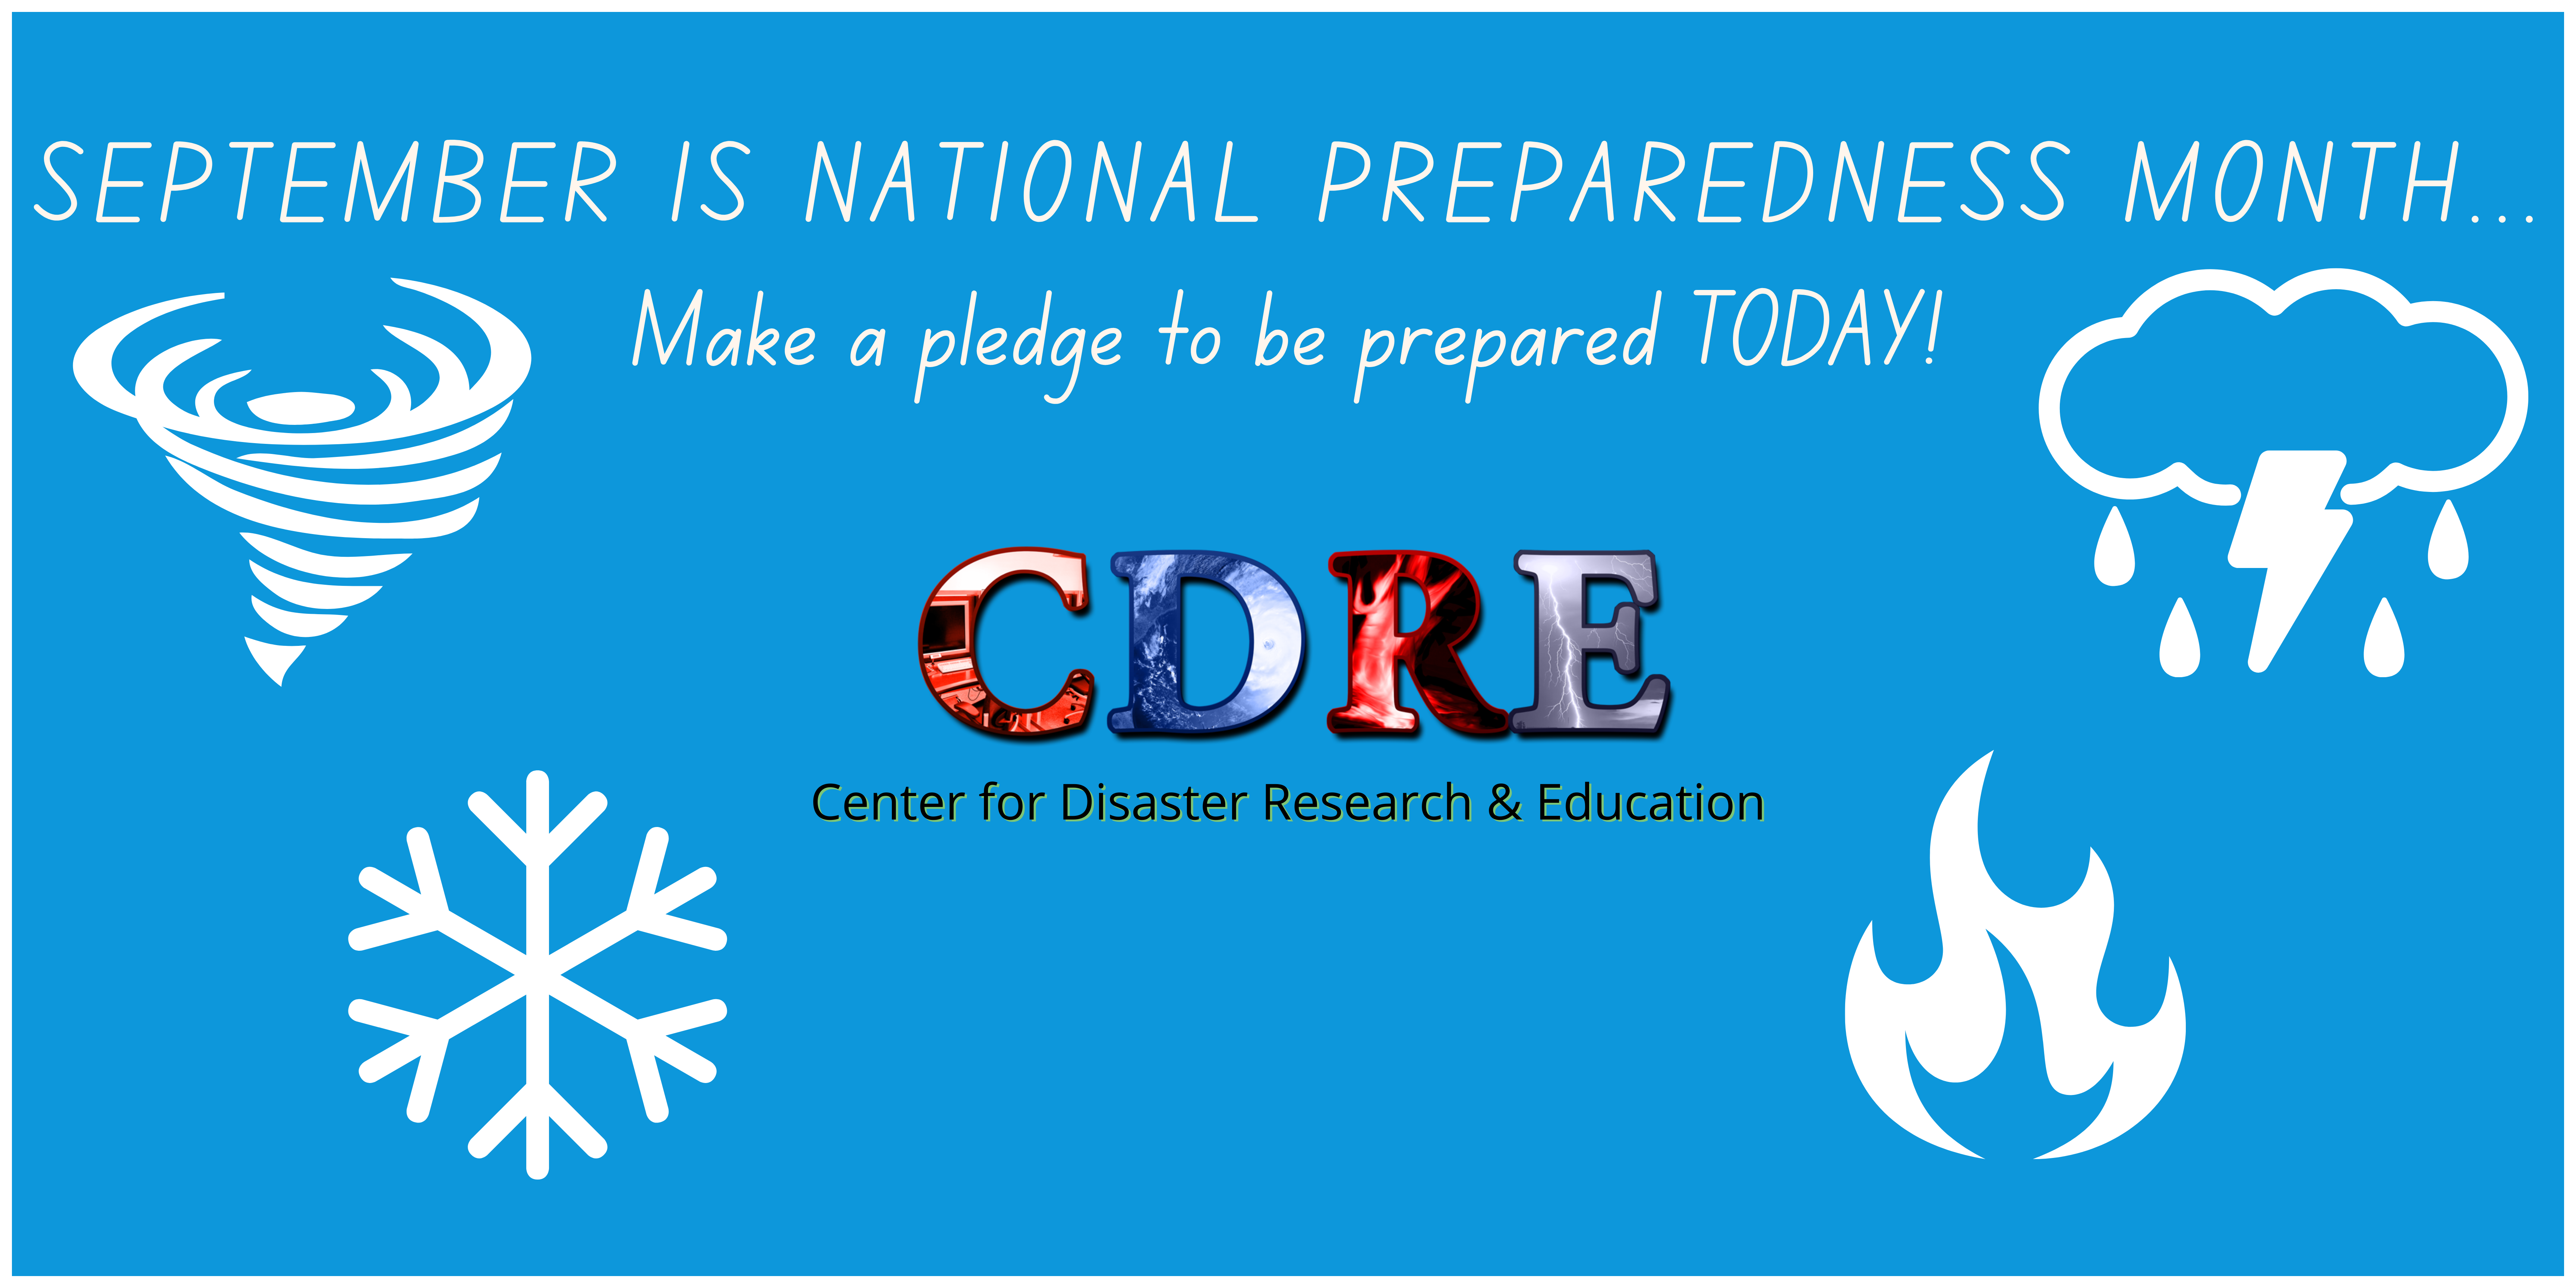 September is preparedness month. Take the pledge to be prepared today!